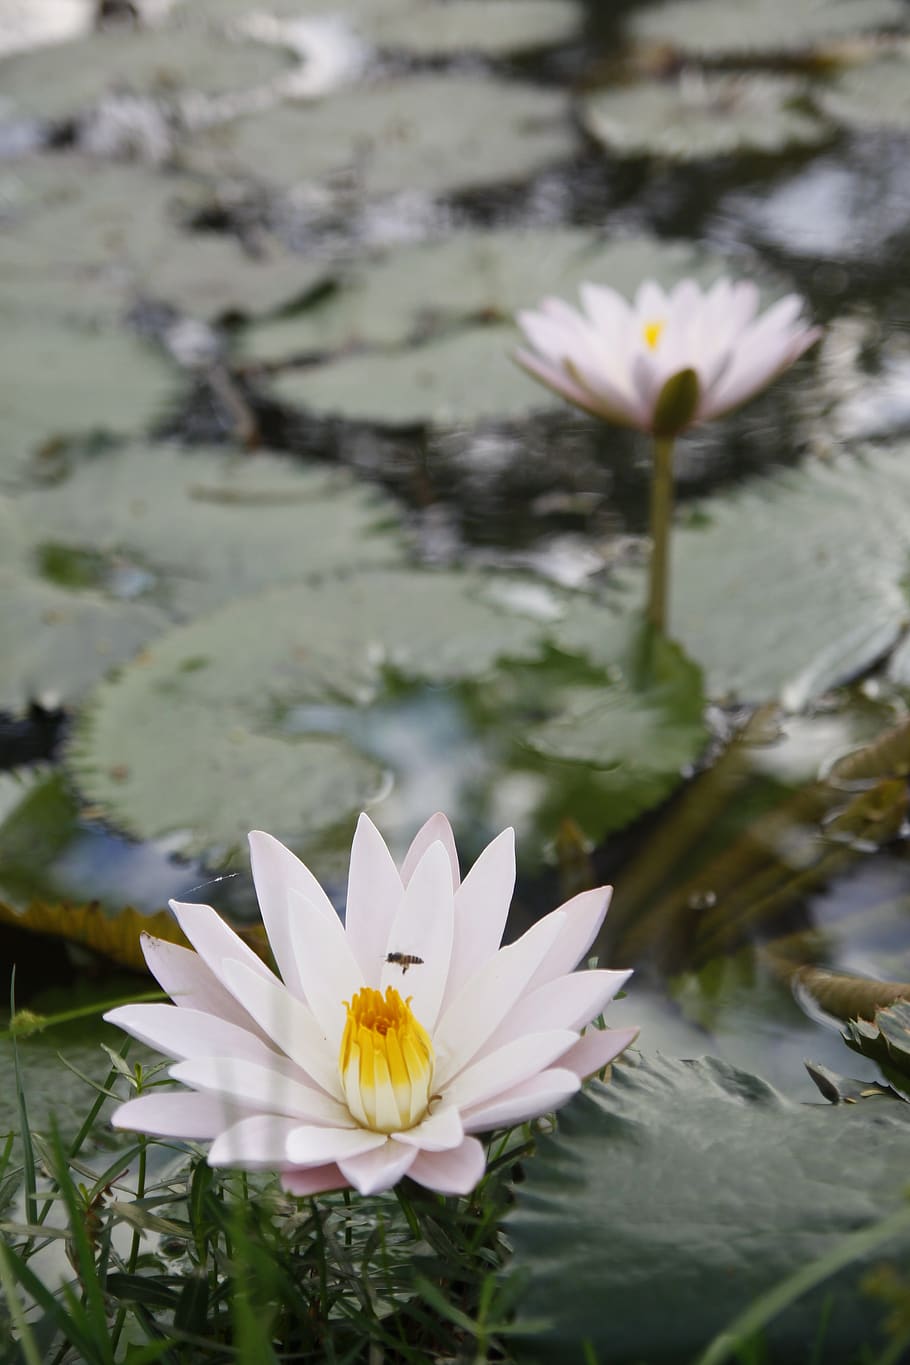 water lily, pond, bloom, sung, thailand, vulnerability, plant, flower, fragility, petal